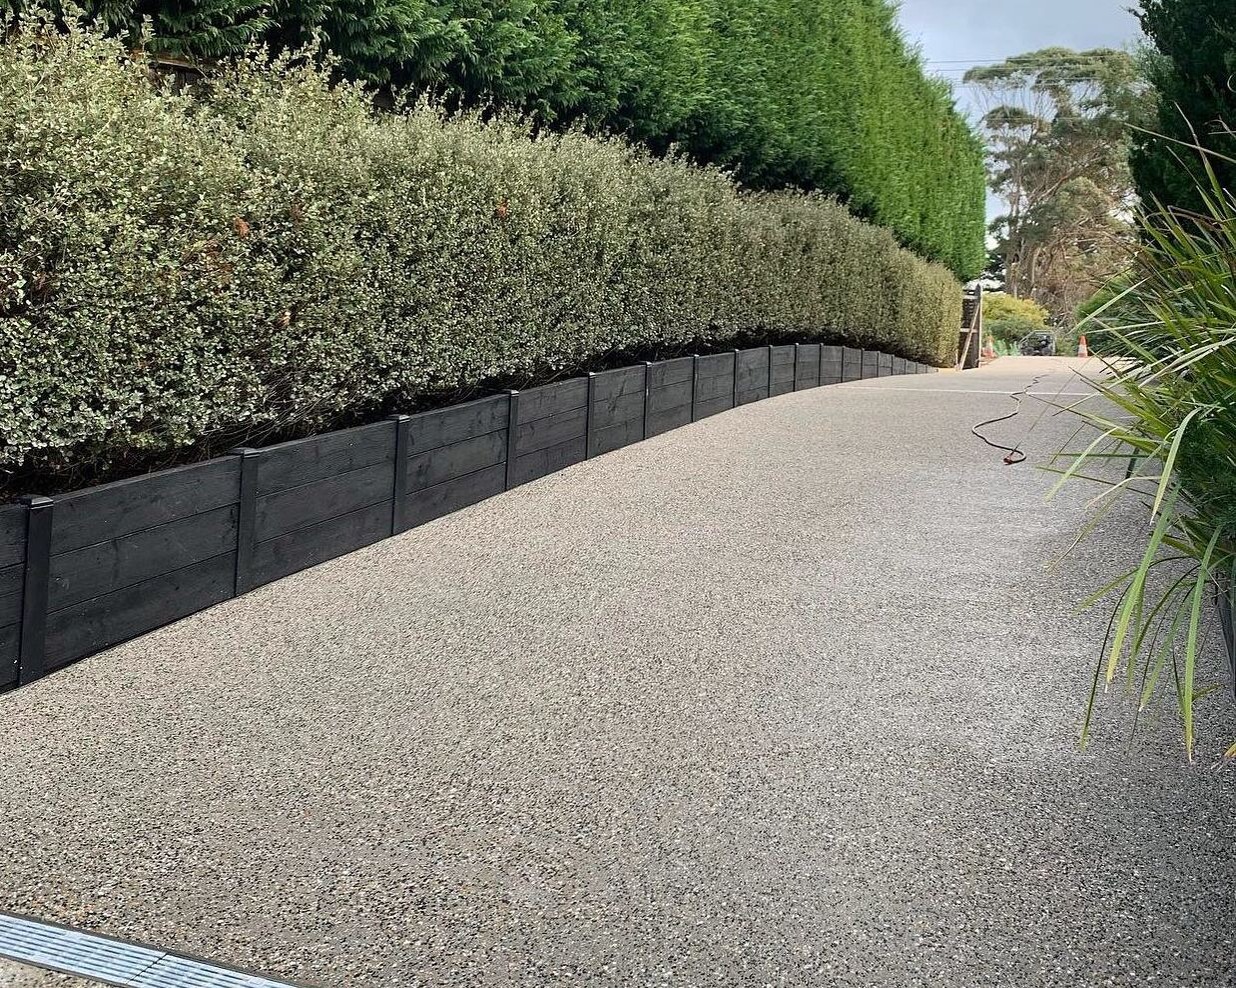 Driveway with an exposed aggregate concrete design.